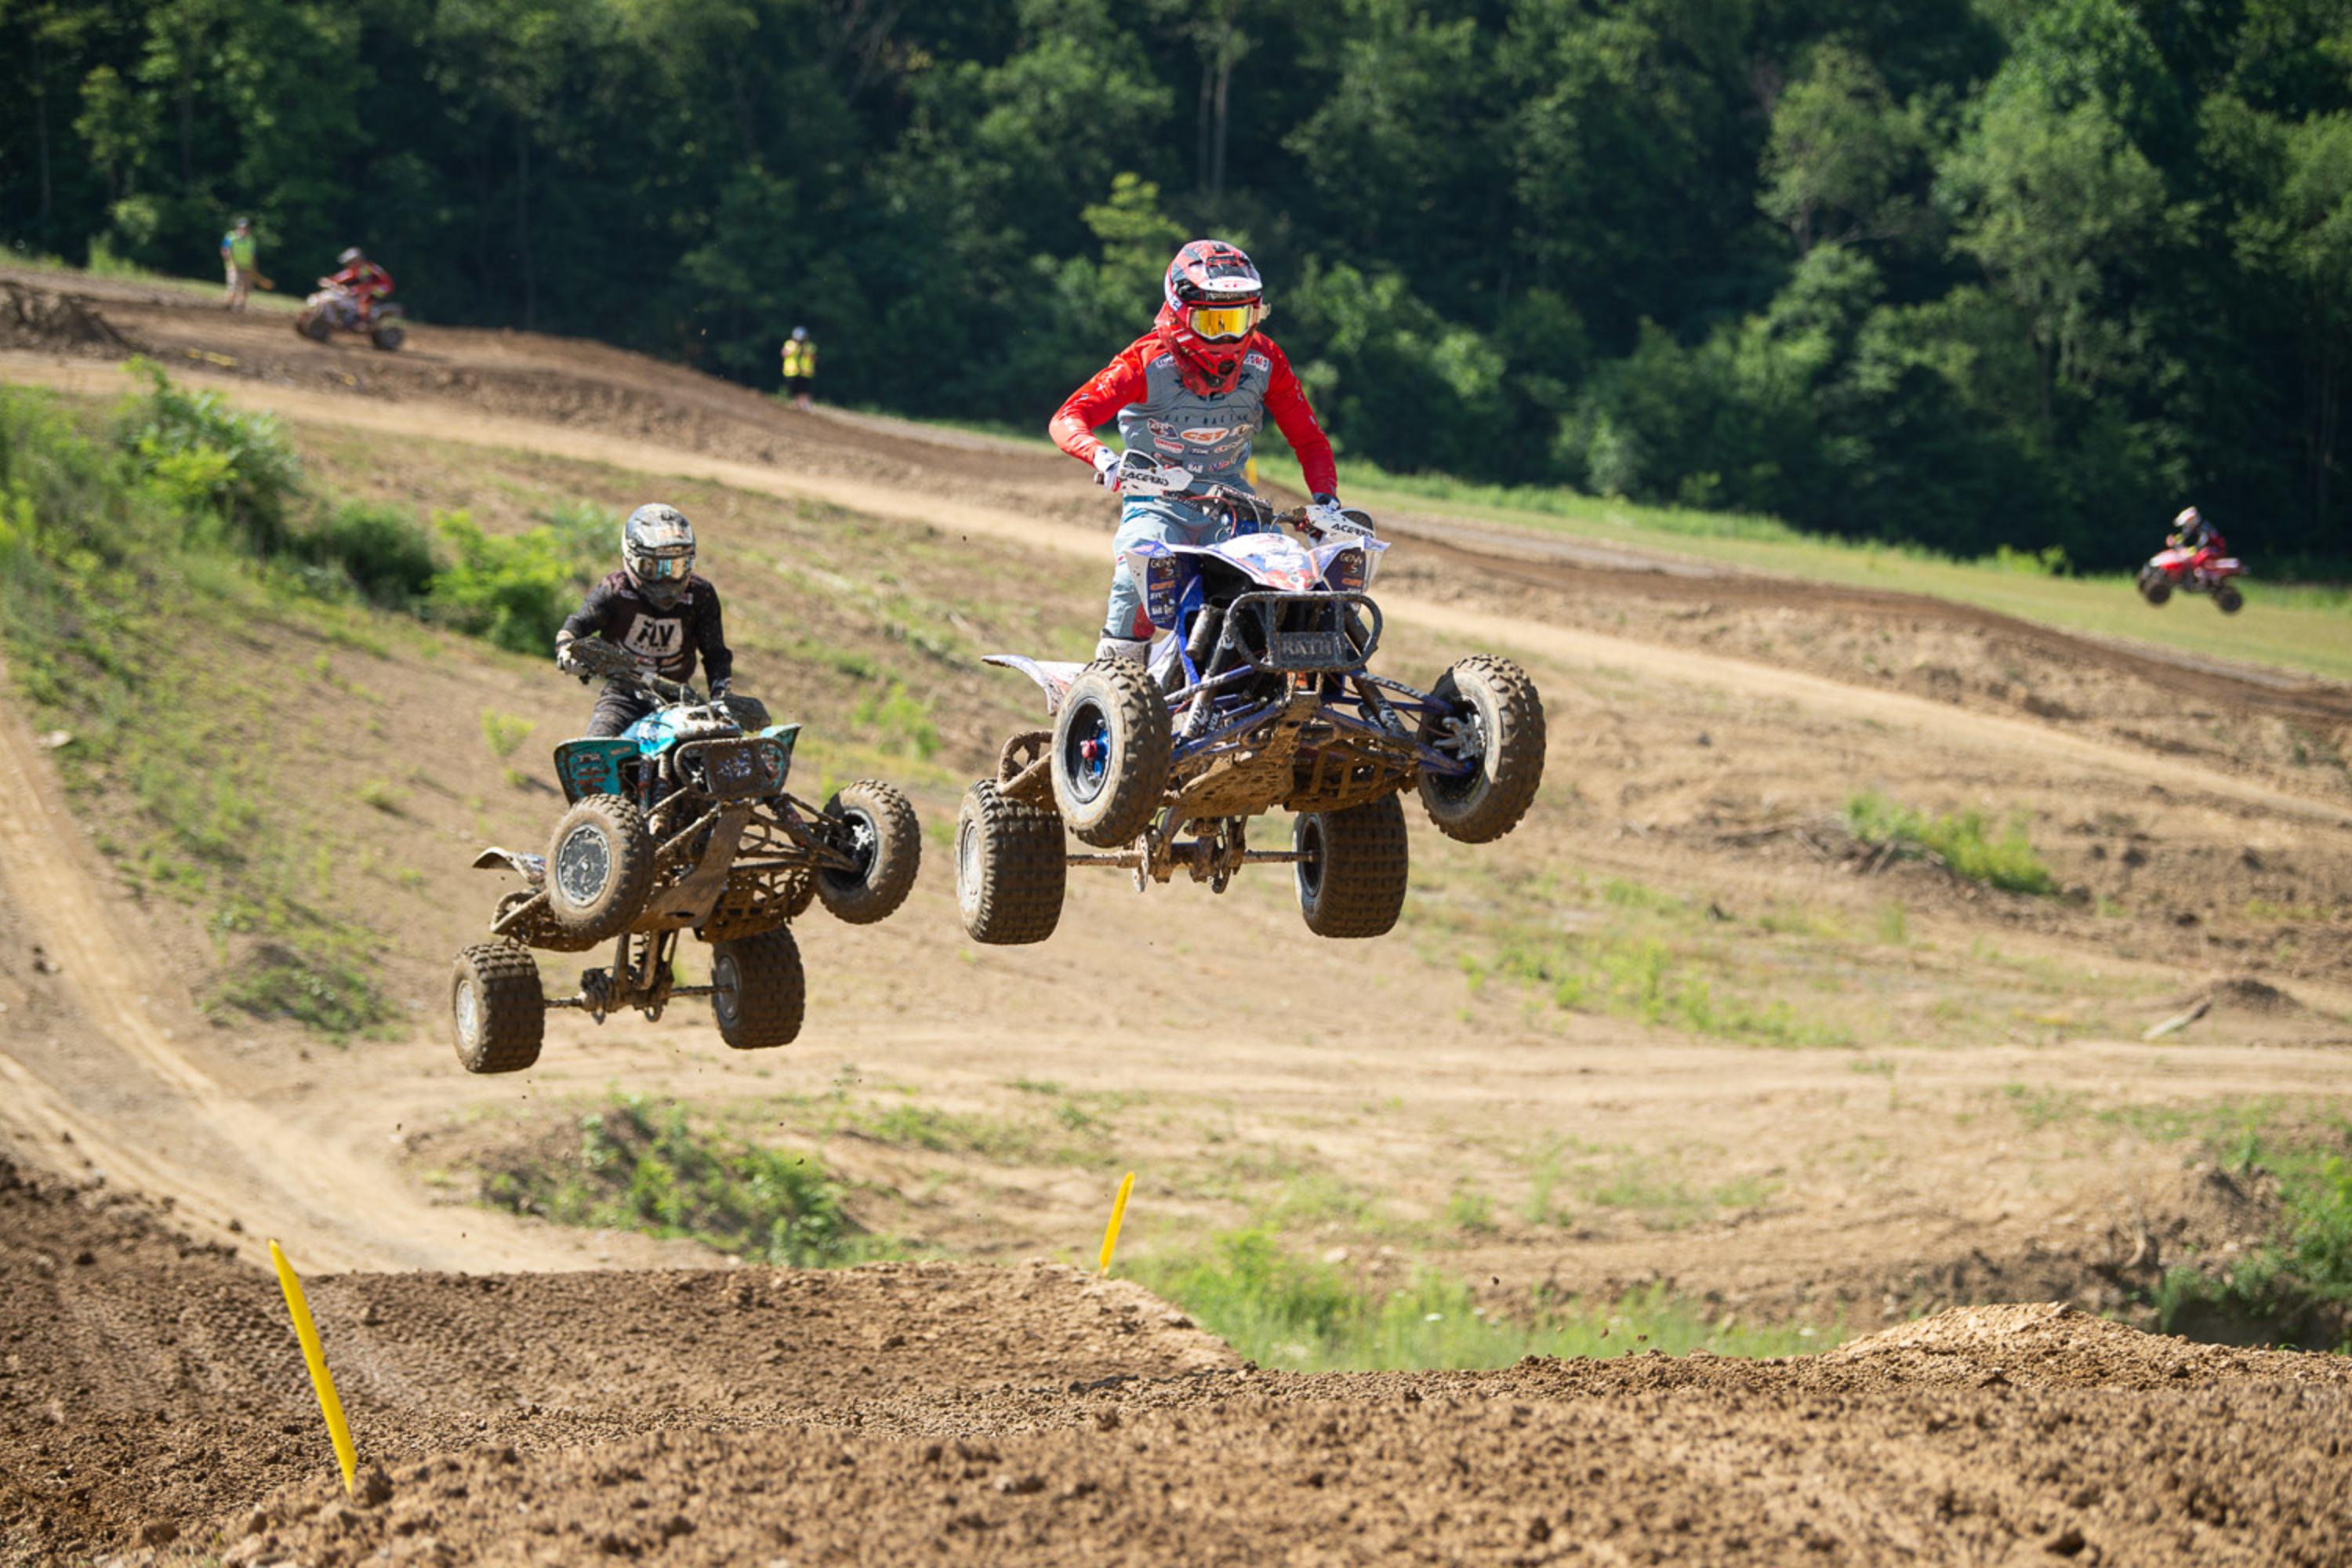 RLT Competition Bulletin 2020-15: Updates to Pro Motocross, GNCC and ATVMX Schedules